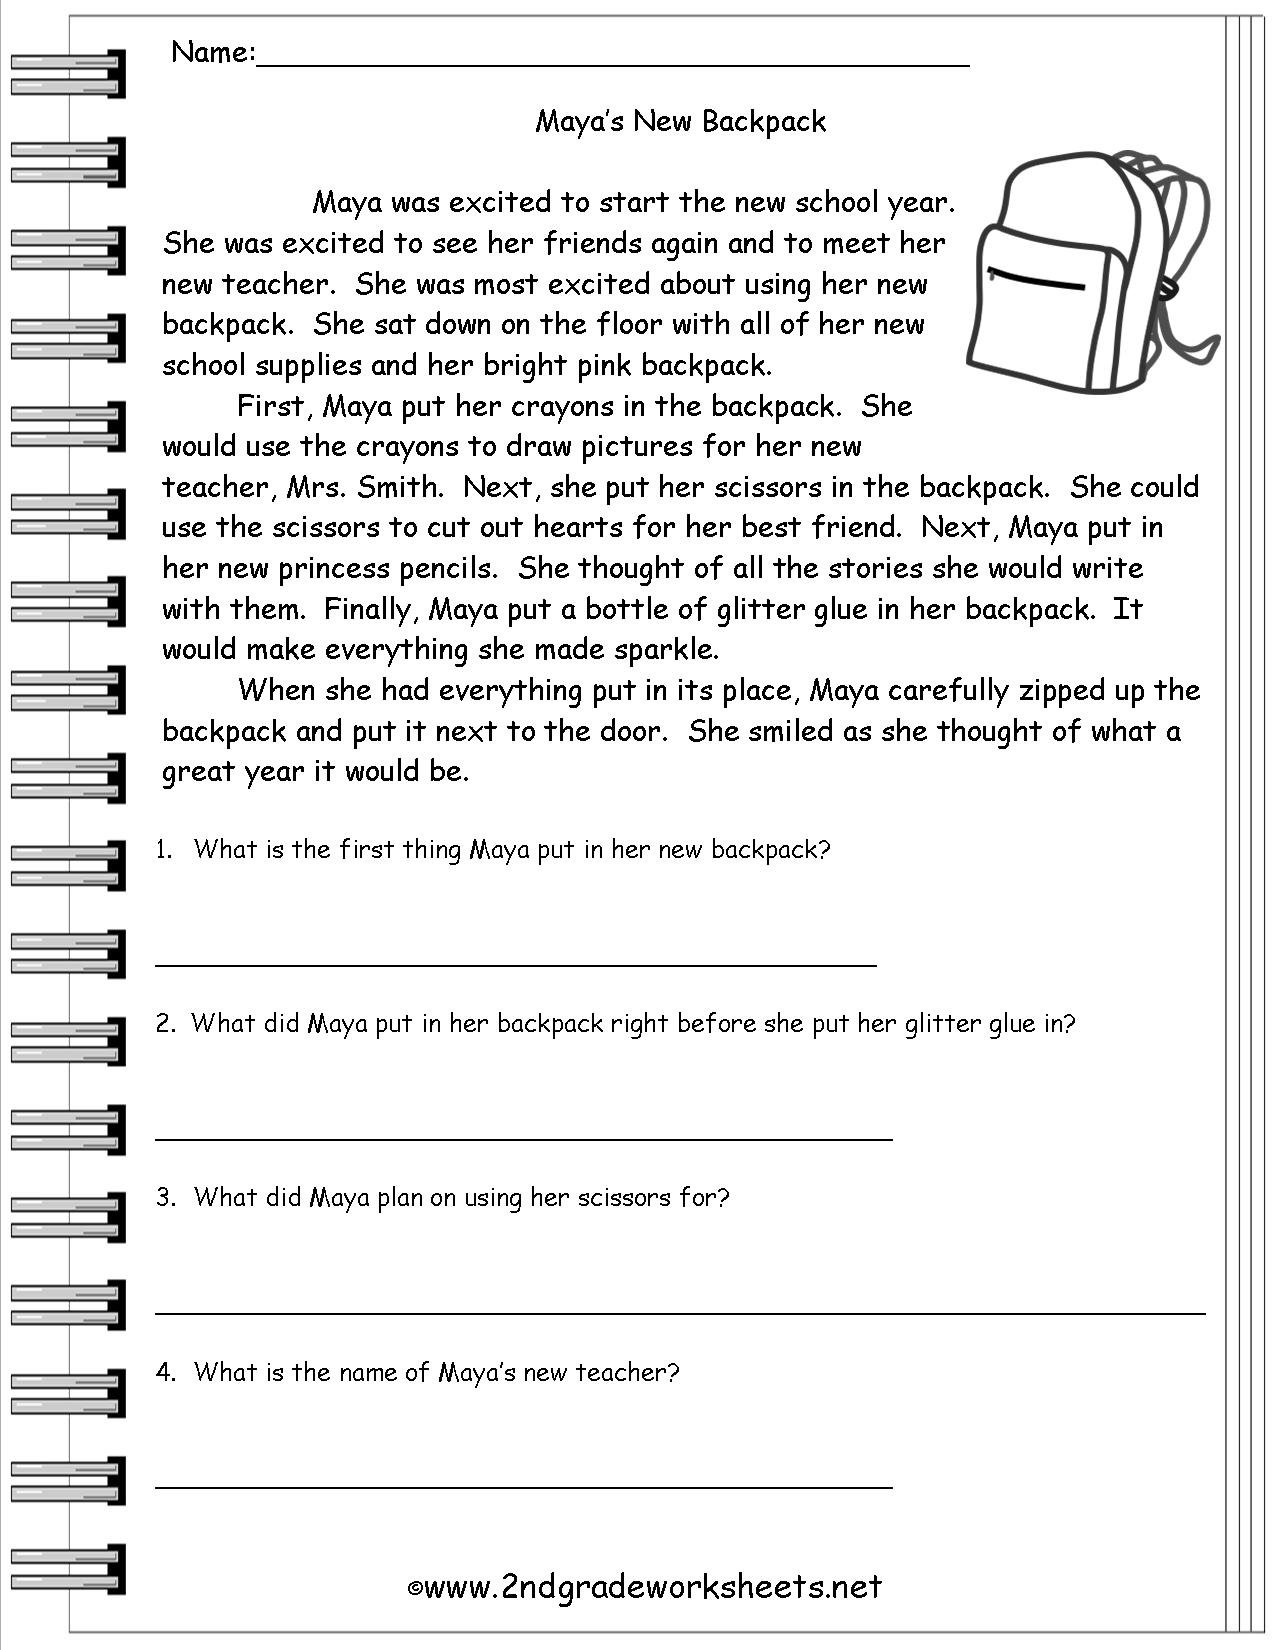 10 Spectacular Main Idea Worksheets For 5Th Grade reading worksheeets 8 2022